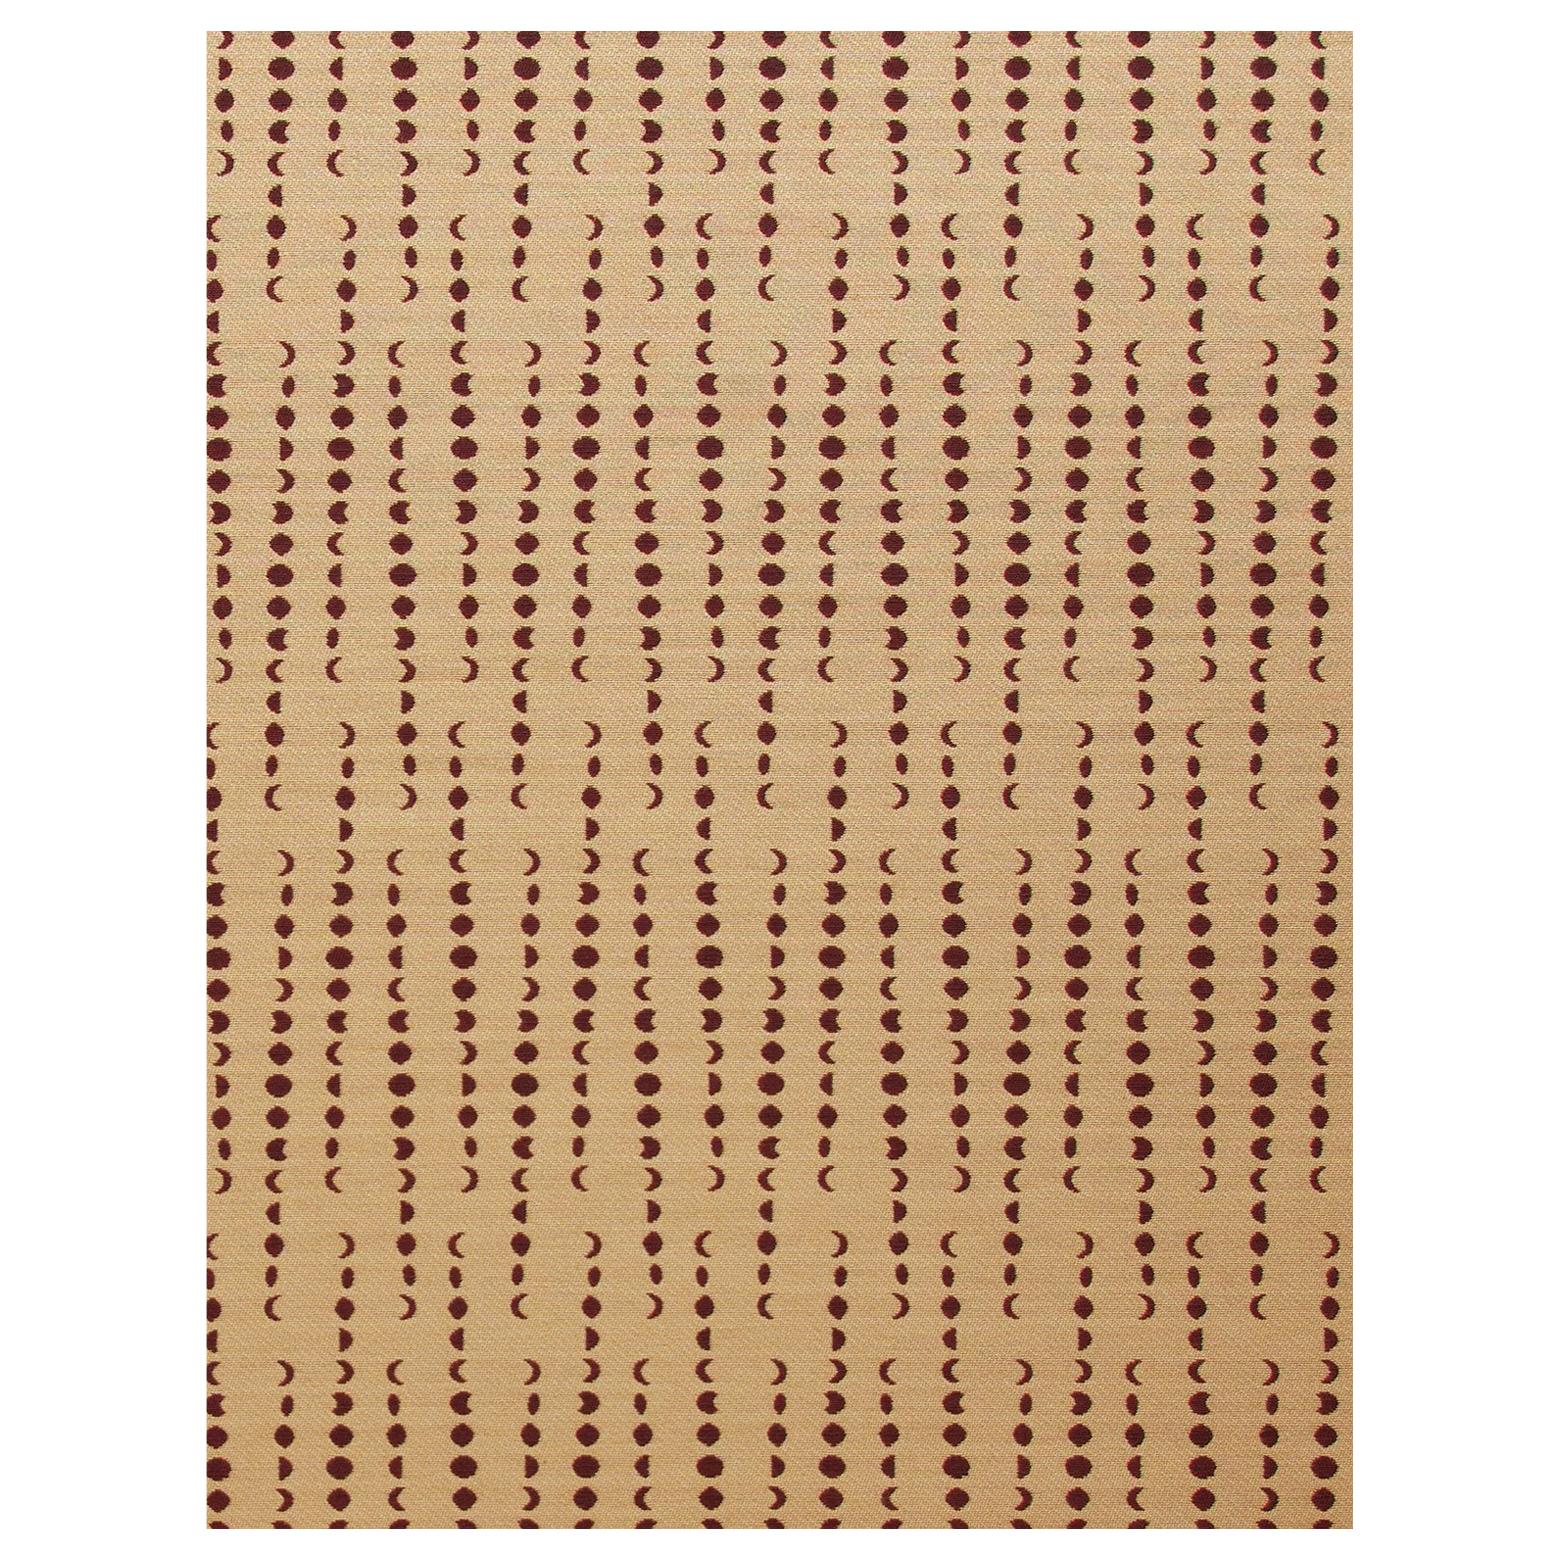 Earthlight Moon Woven Commercial Grade Fabric in Sol:: Camel und Burgundy